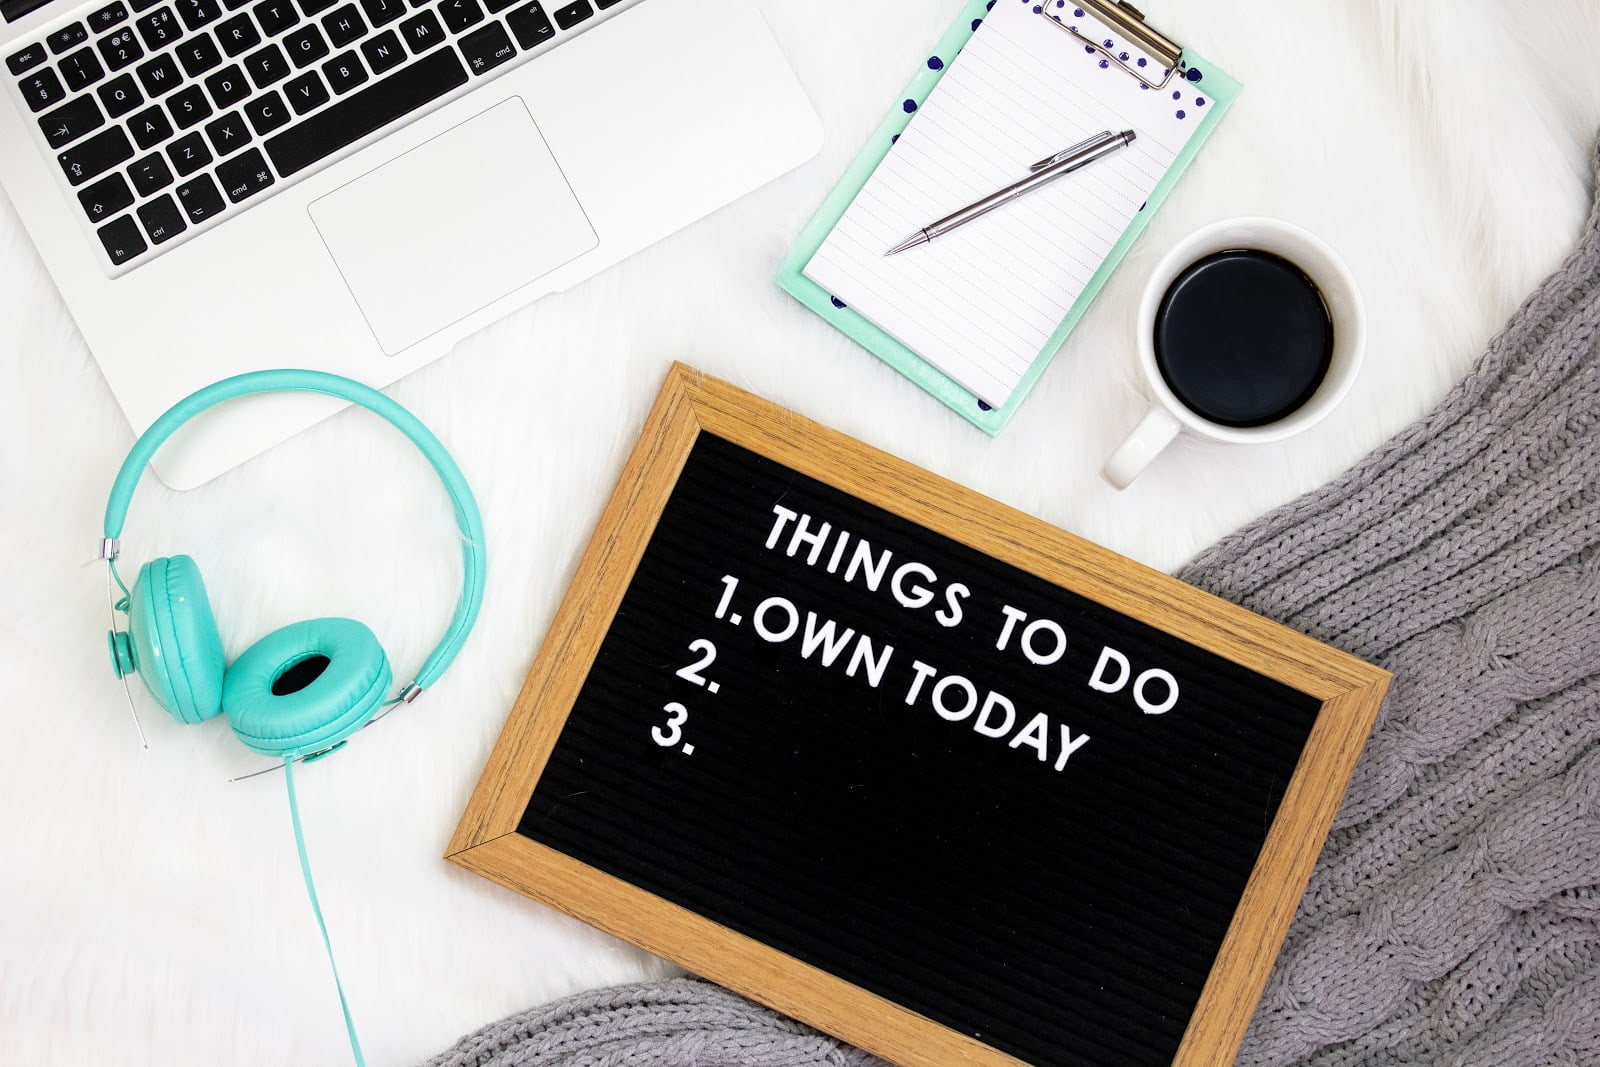 Black sign that says 'Things to do 1. Own Today' beside turquoise headphones and notebook, beside a cup of black coffee and the keyboard of a Macbook